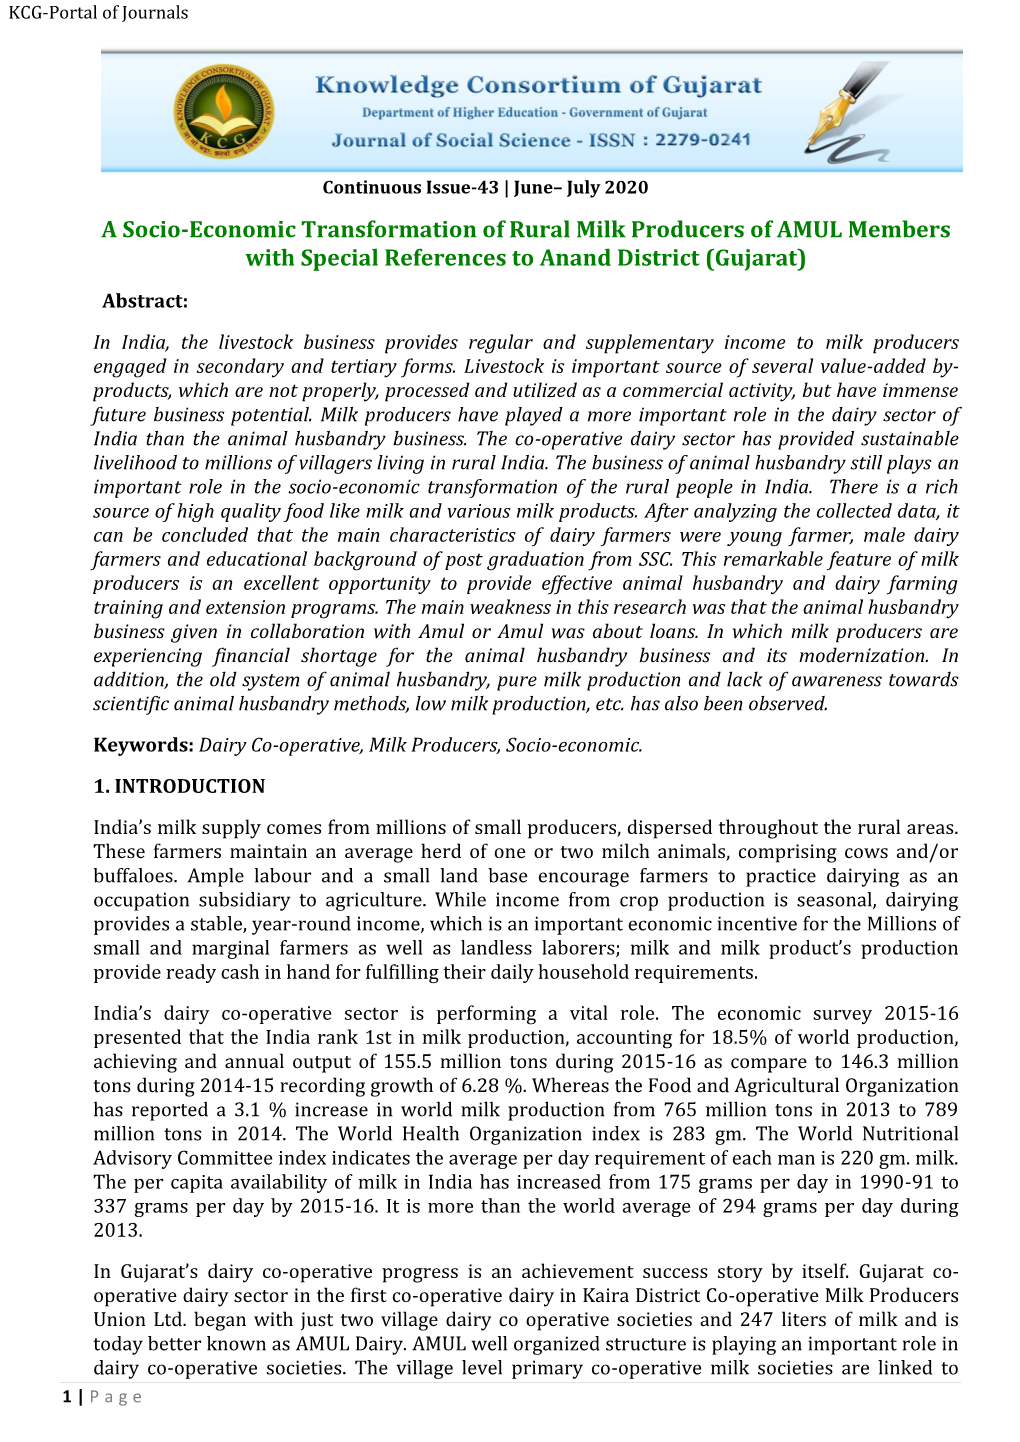 A Socio-Economic Transformation of Rural Milk Producers of AMUL Members with Special References to Anand District (Gujarat)